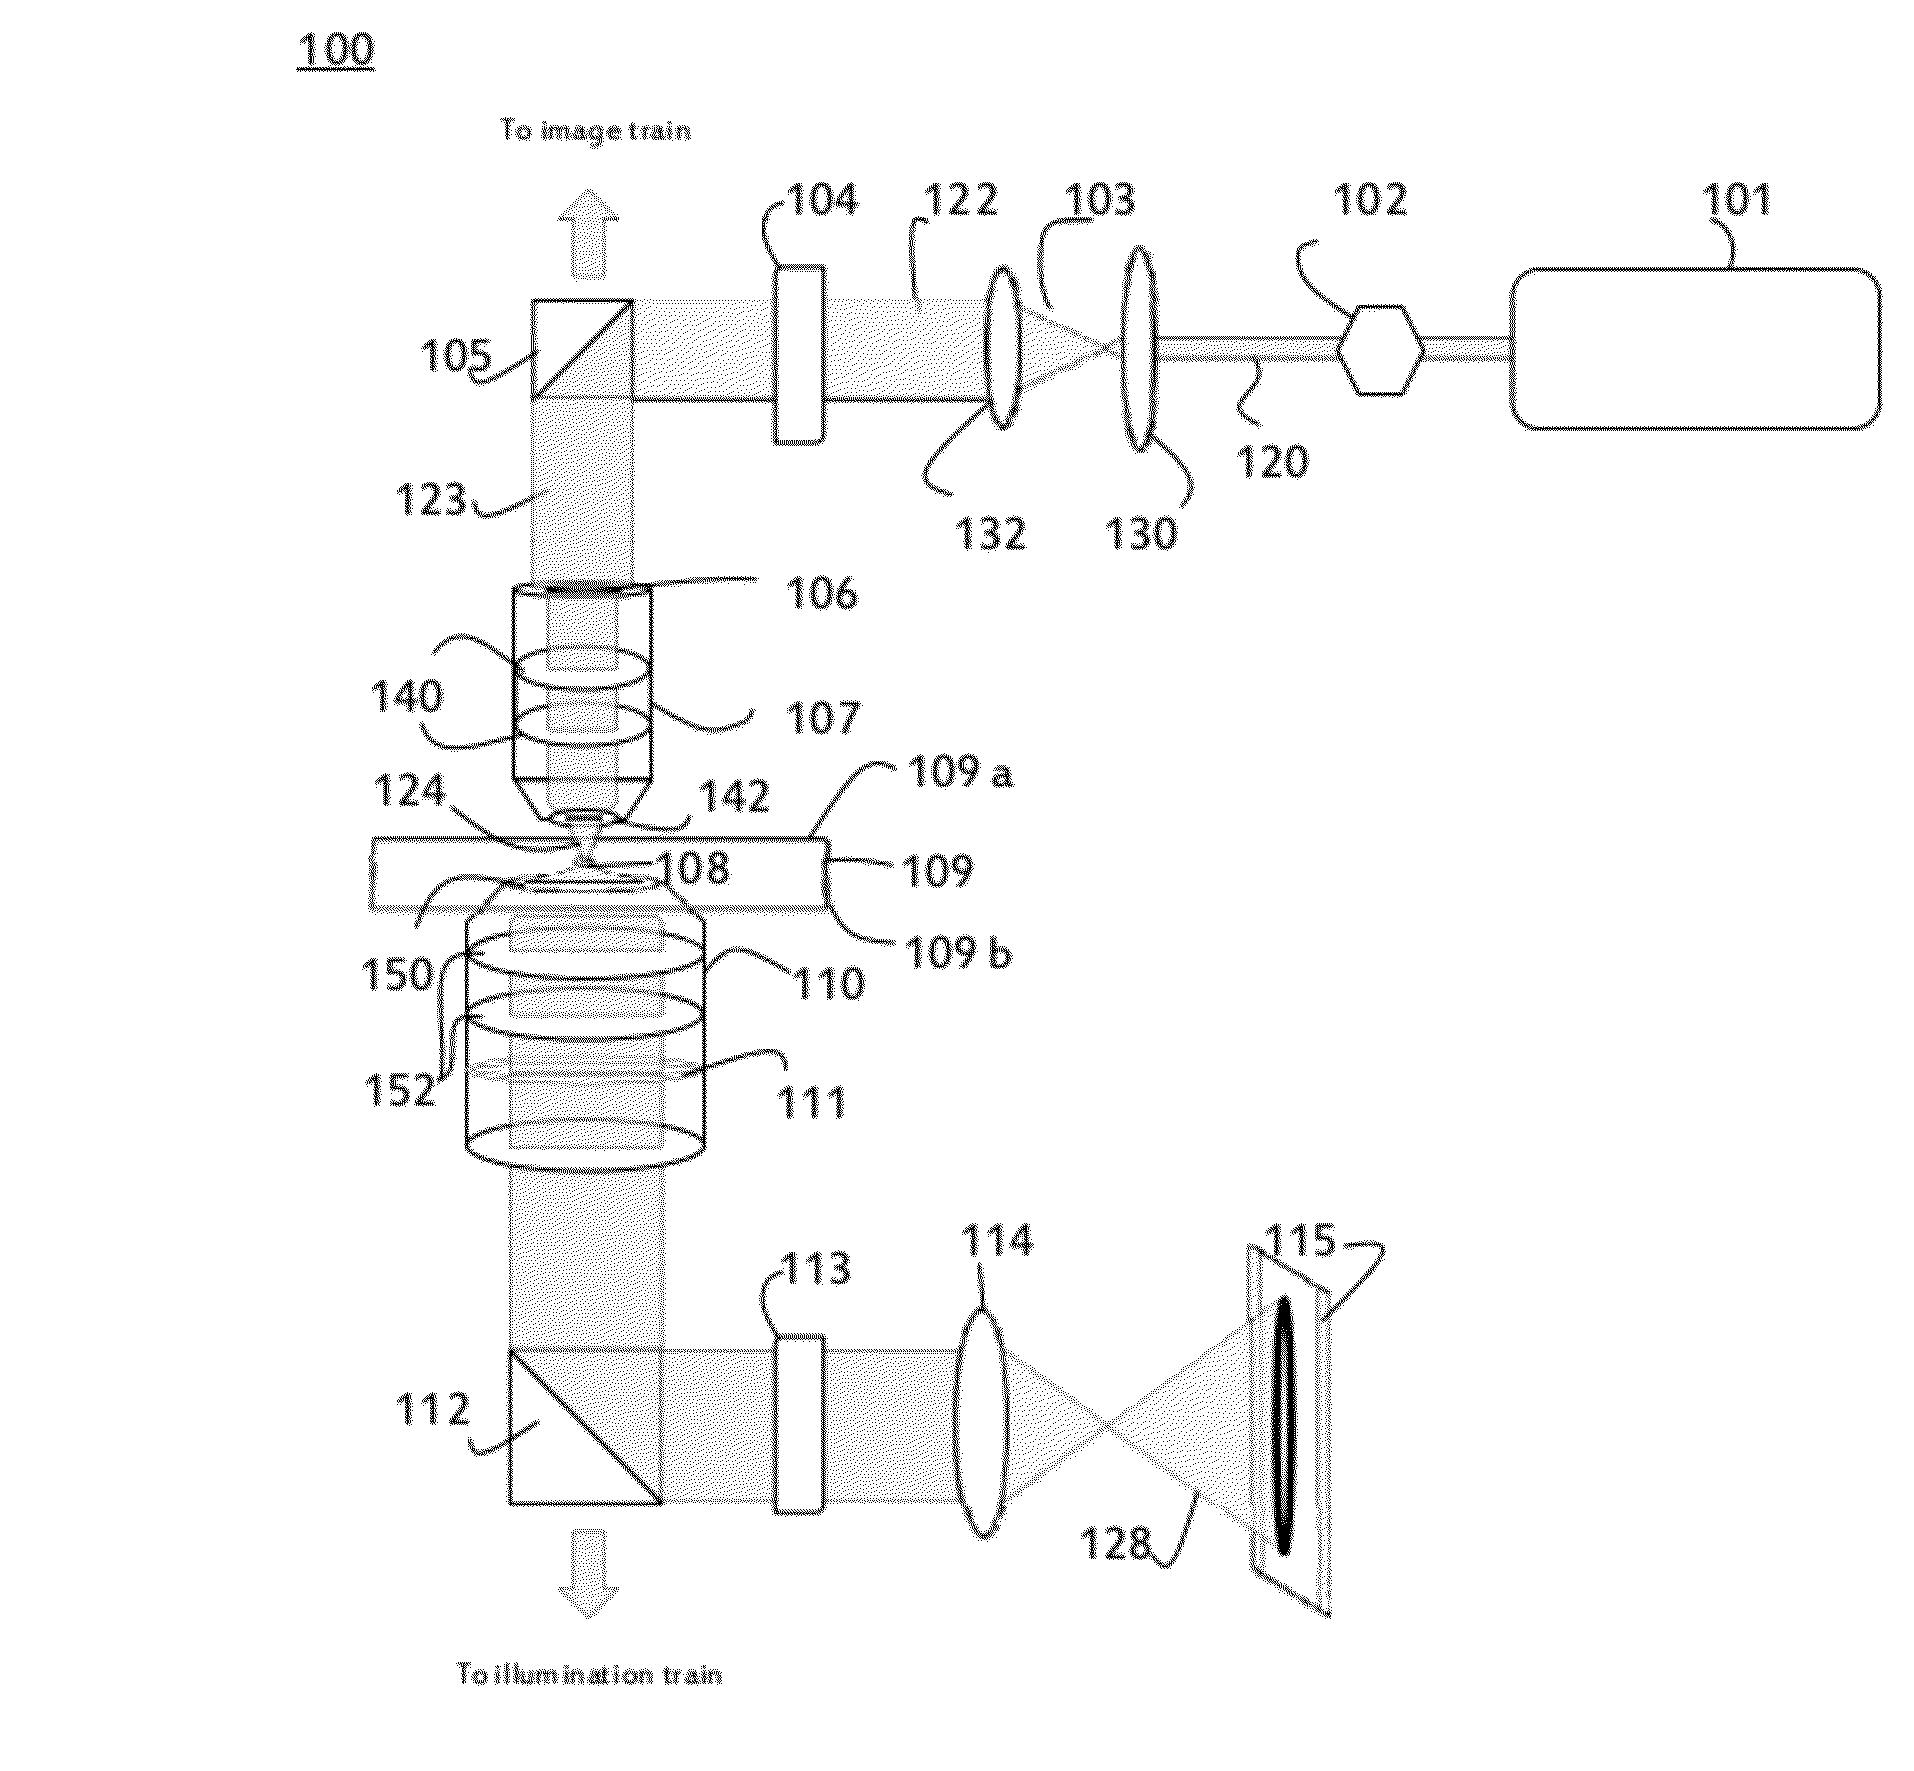 Method and Apparatus for Measuring the Optical Forces Acting on a Particle